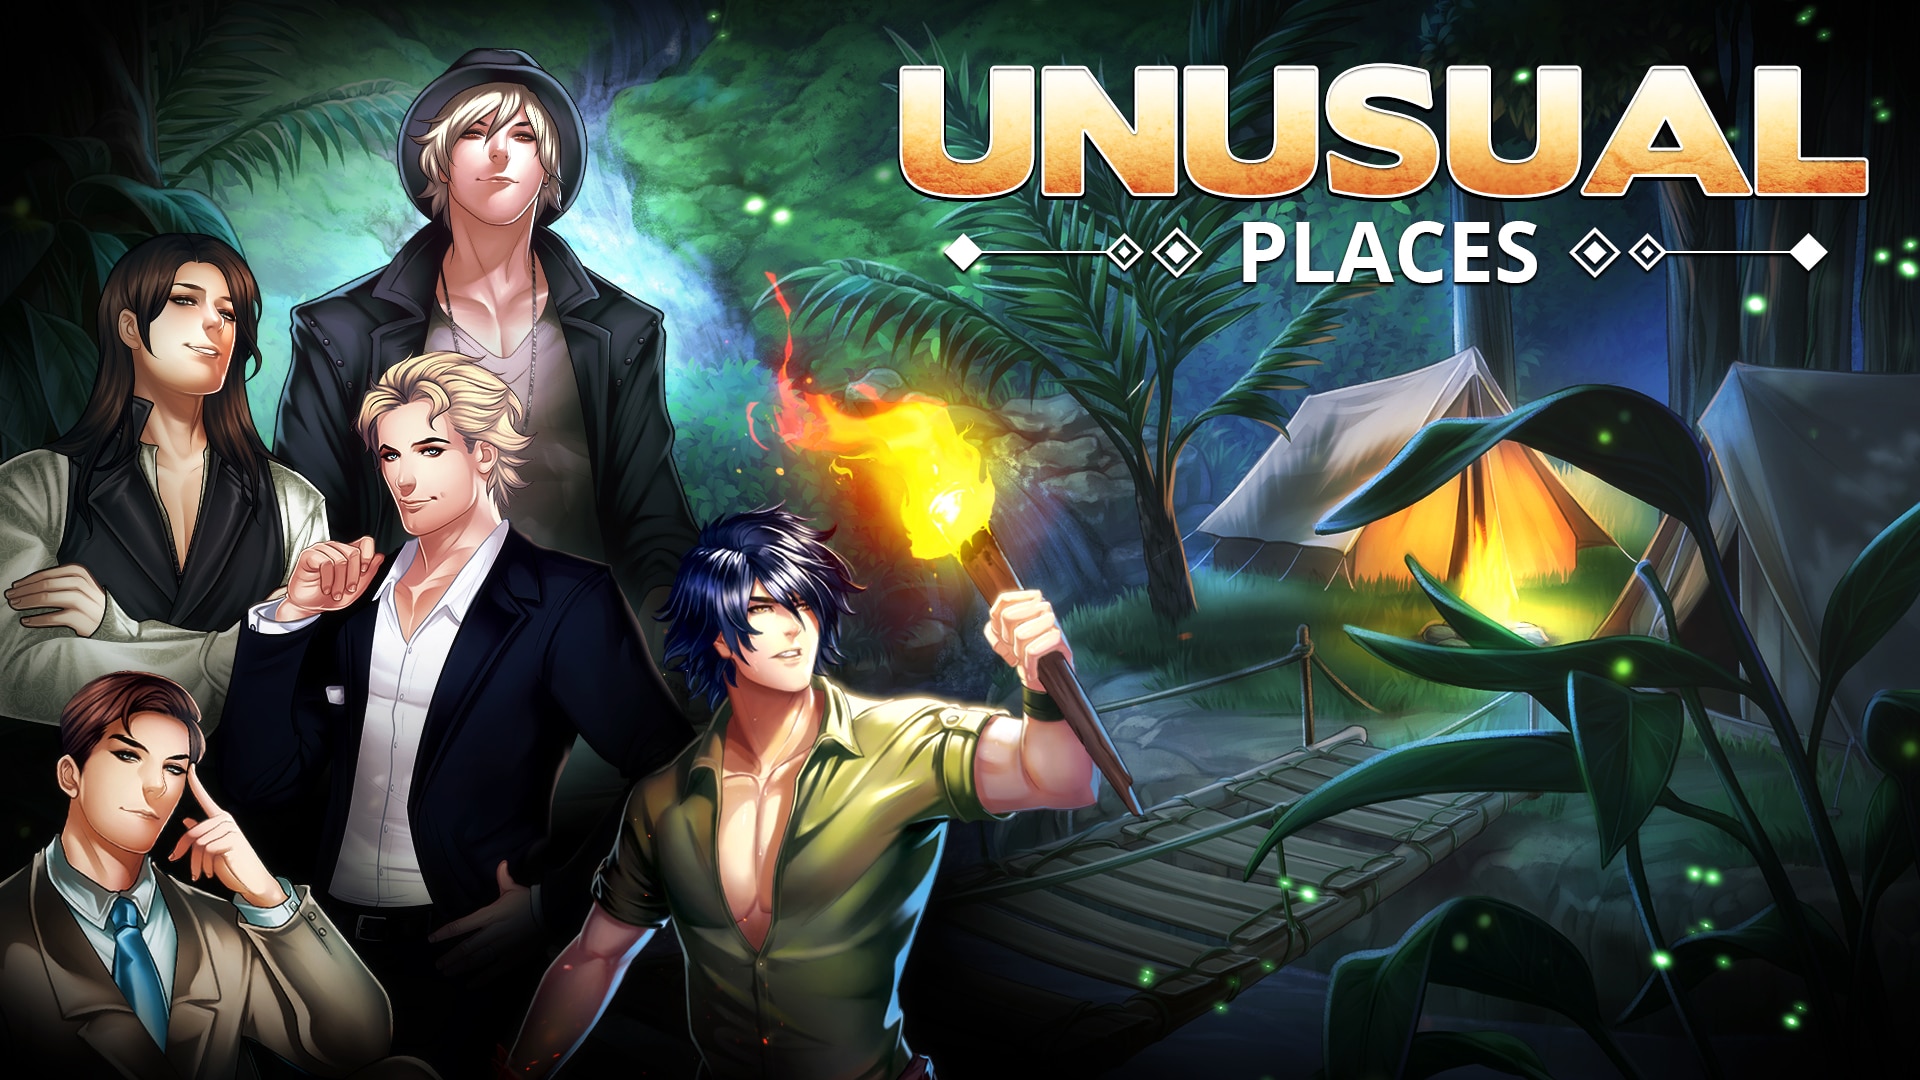 Extra Event “Unusual places”